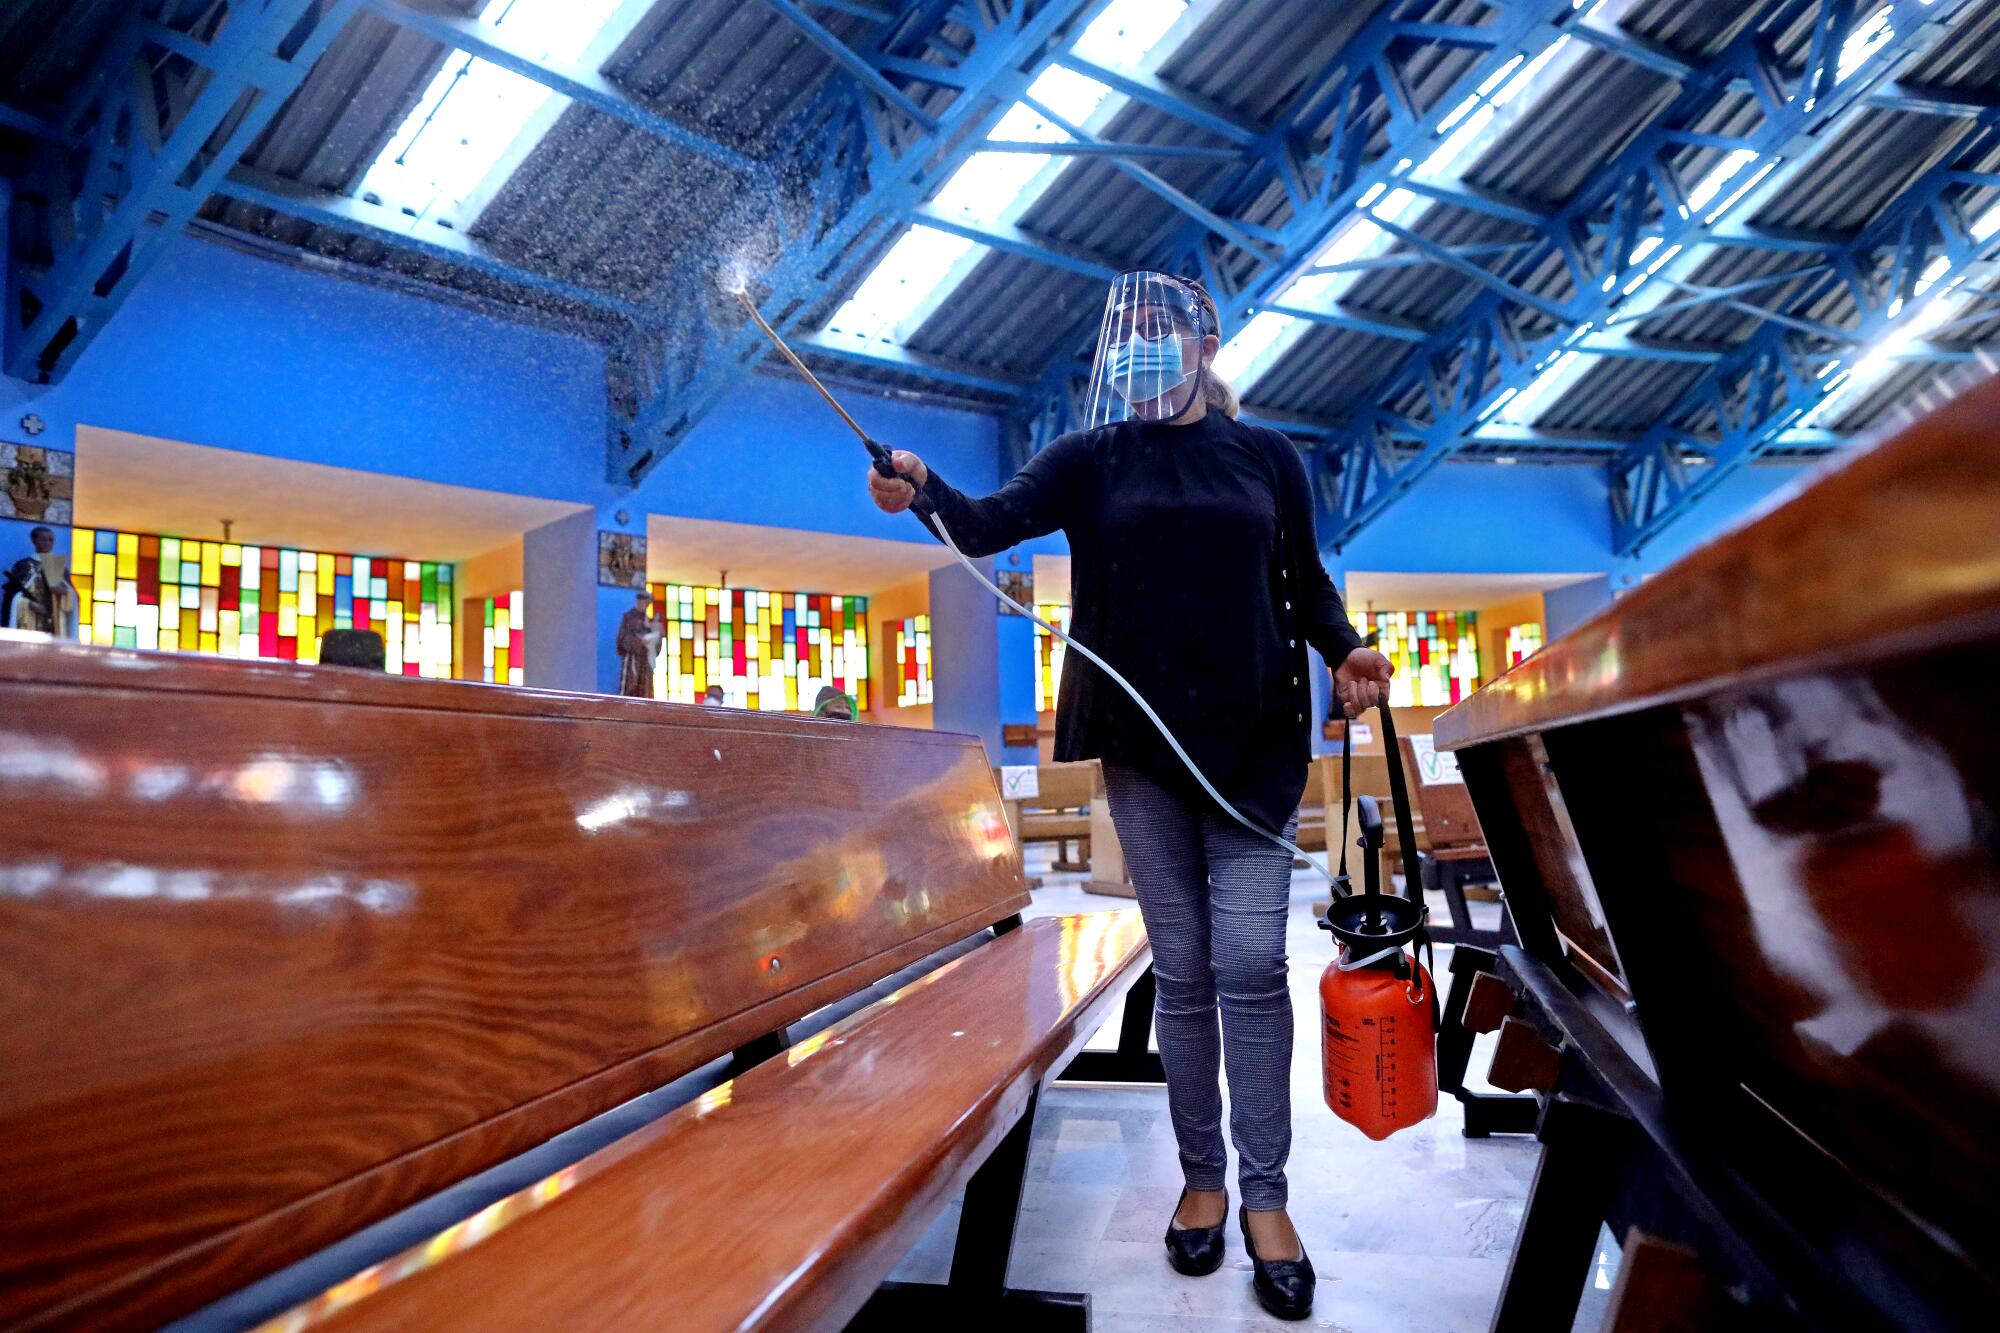 A woman in a mask and face shield uses a handheld pump to spray disinfectant on church pews